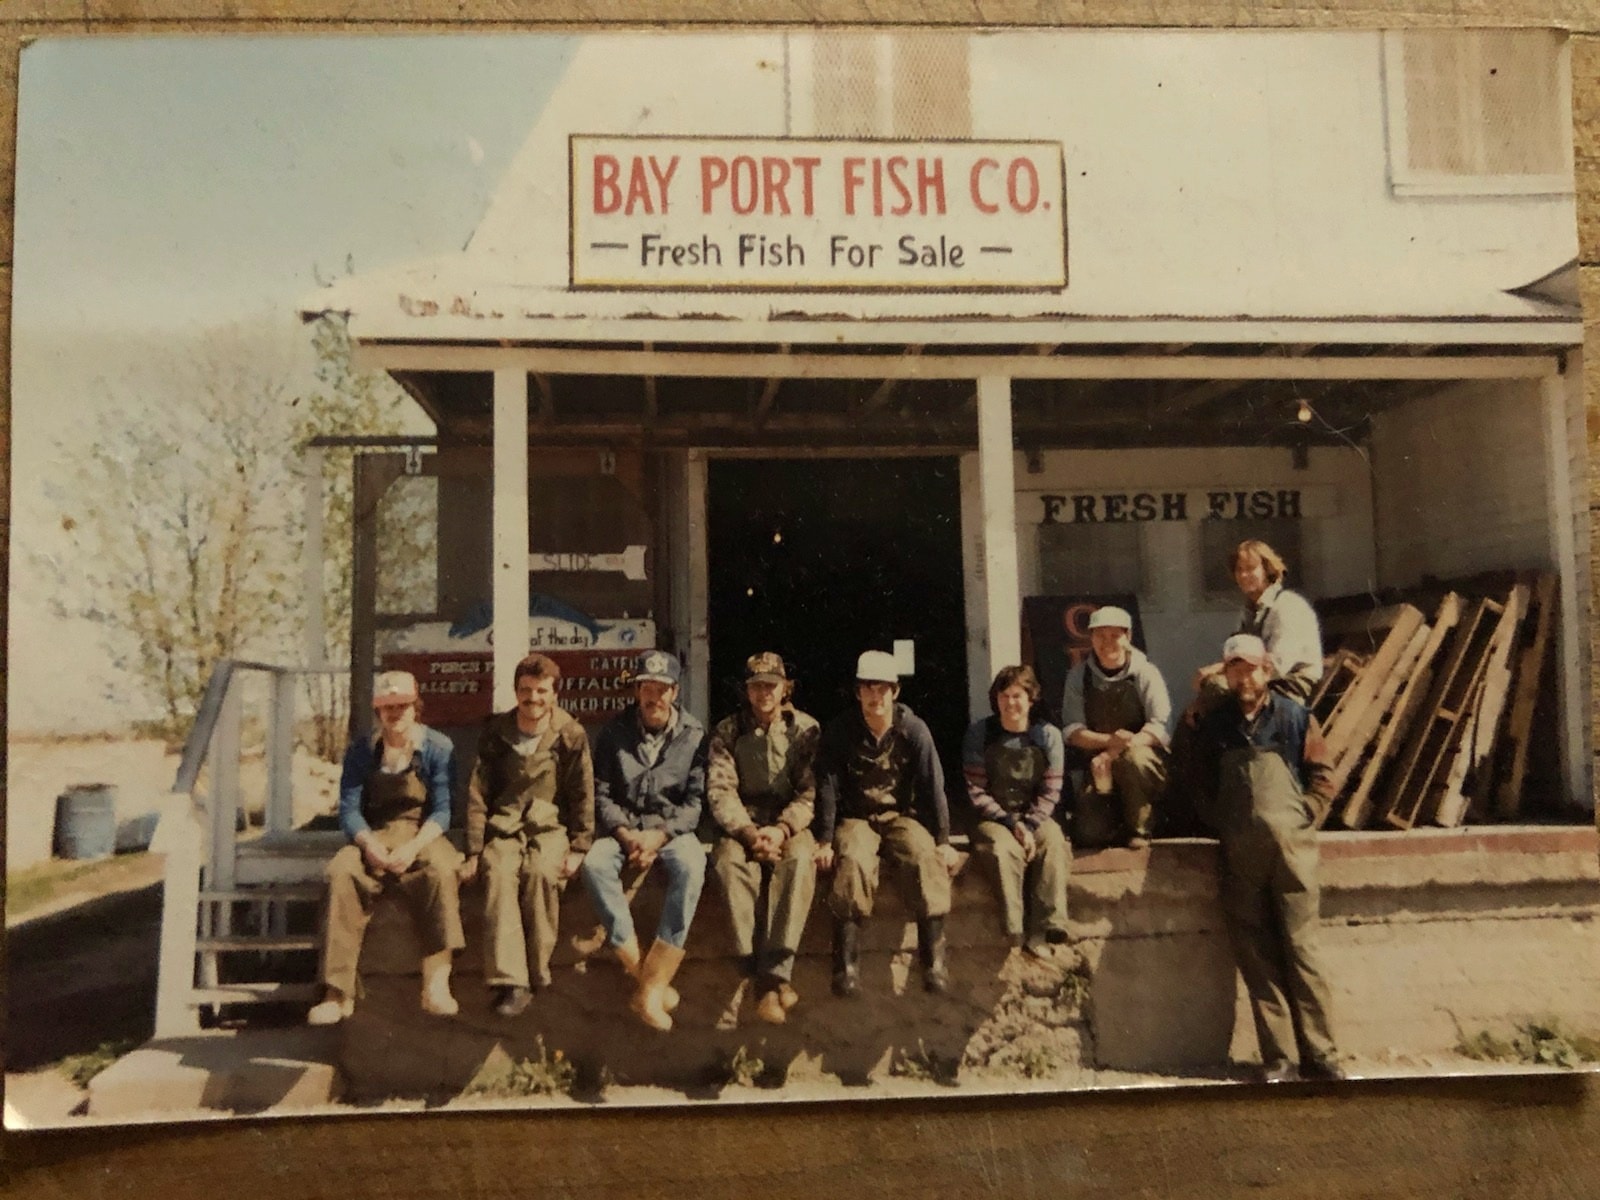 Group photo in front of the Bay Port fish company